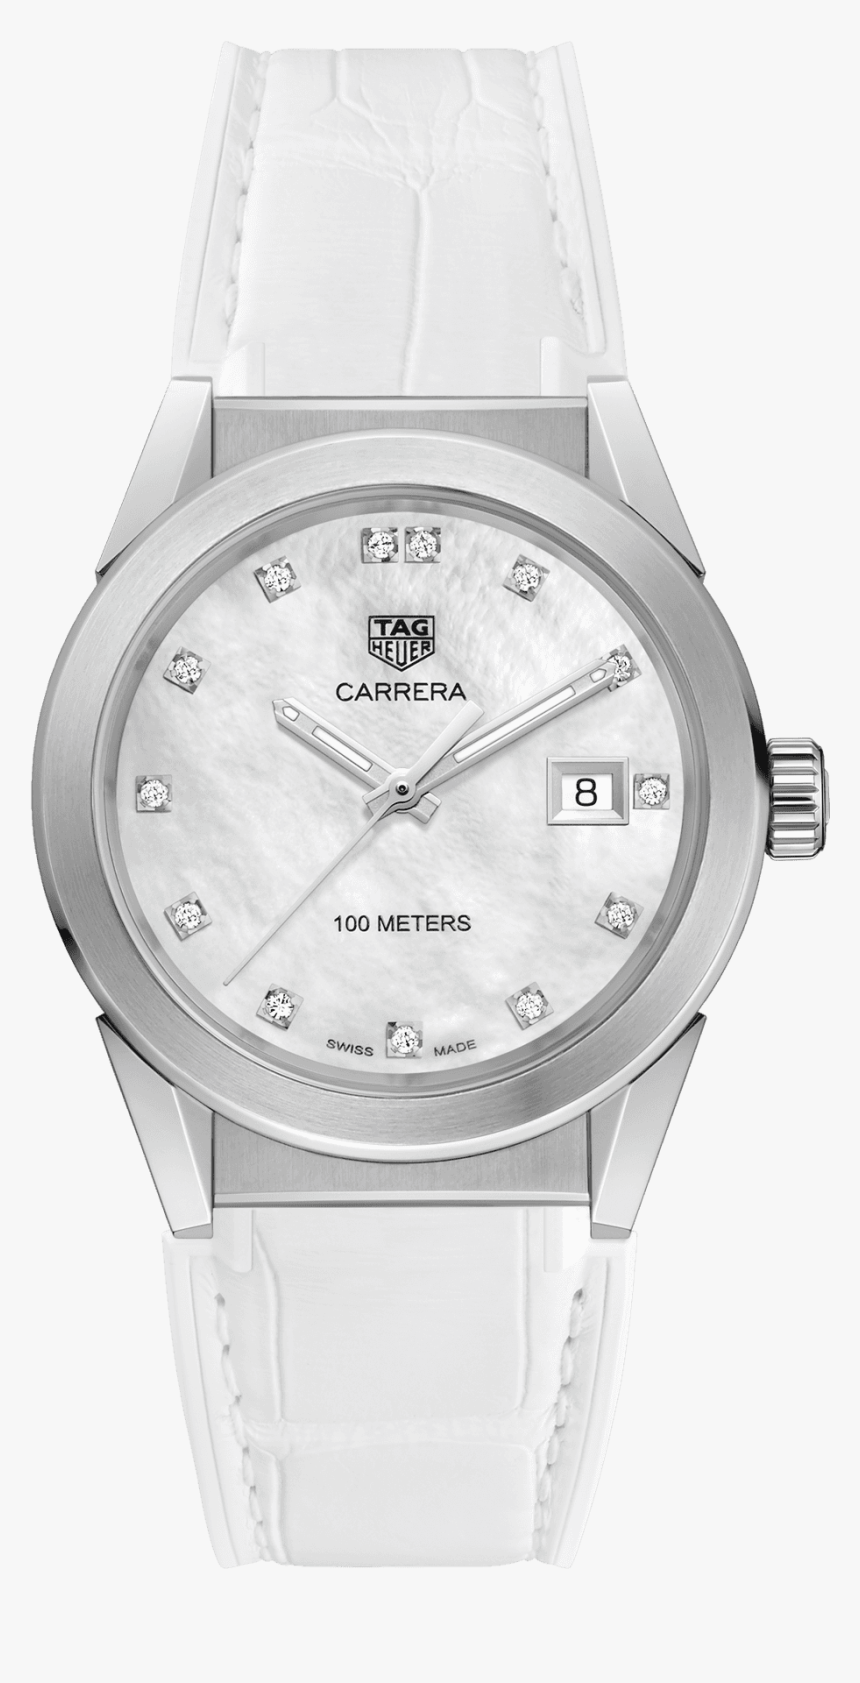 Tag Heuer Carrera Quartz - Tag Heuer Watch White, HD Png Download, Free Download